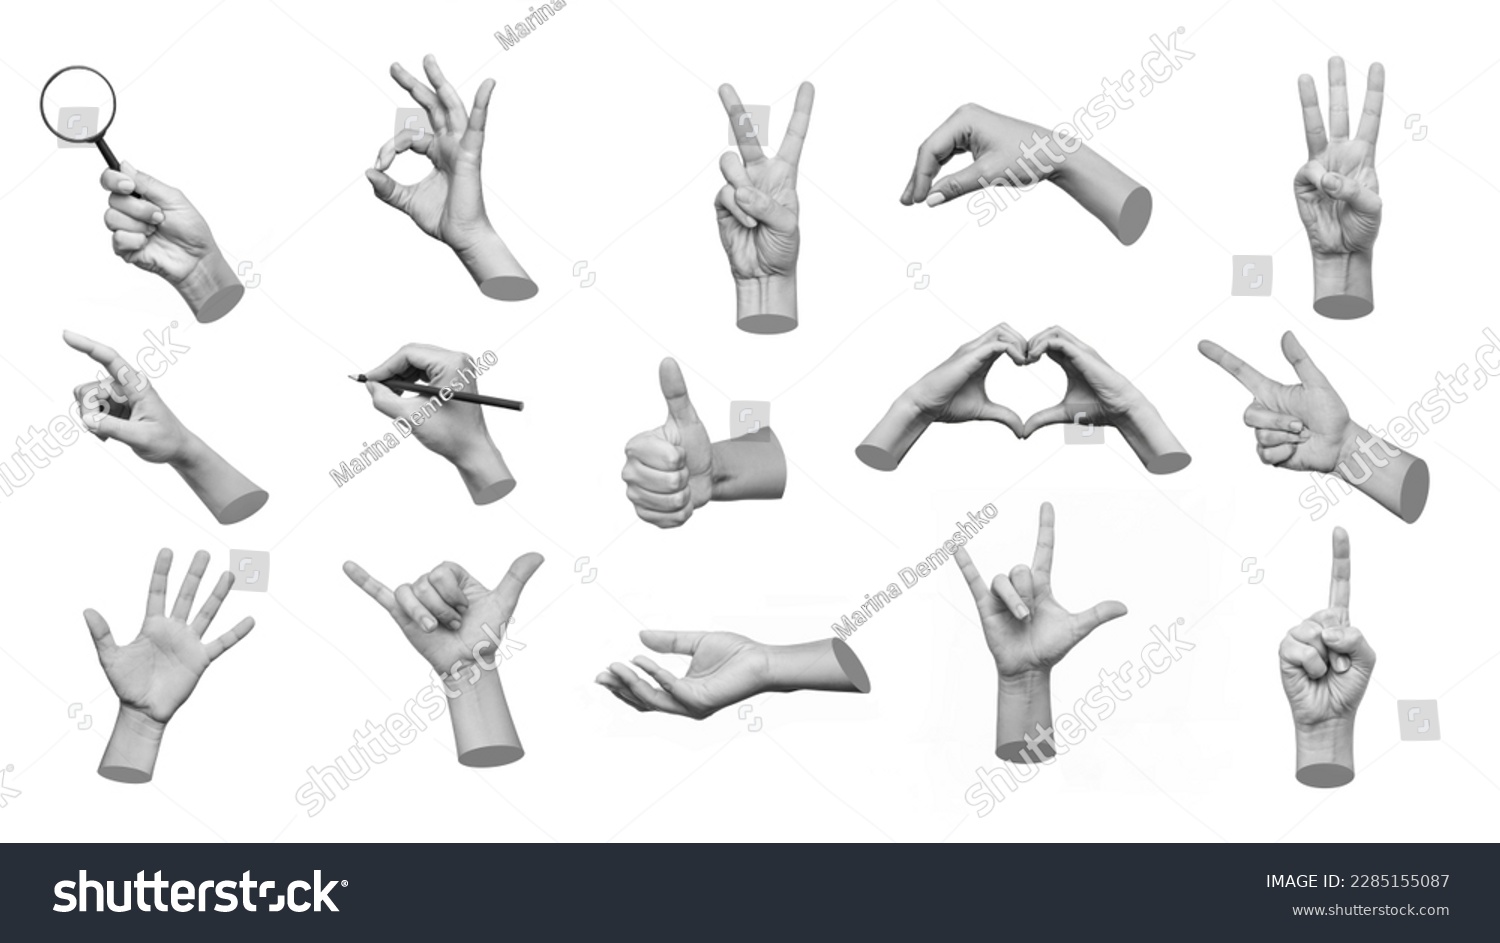 Collection of 3d hands showing gestures ok, peace, thumb up, point to object, shaka, rock, holding magnifying glass, writing on white background. Contemporary art, creative collage. Modern design #2285155087